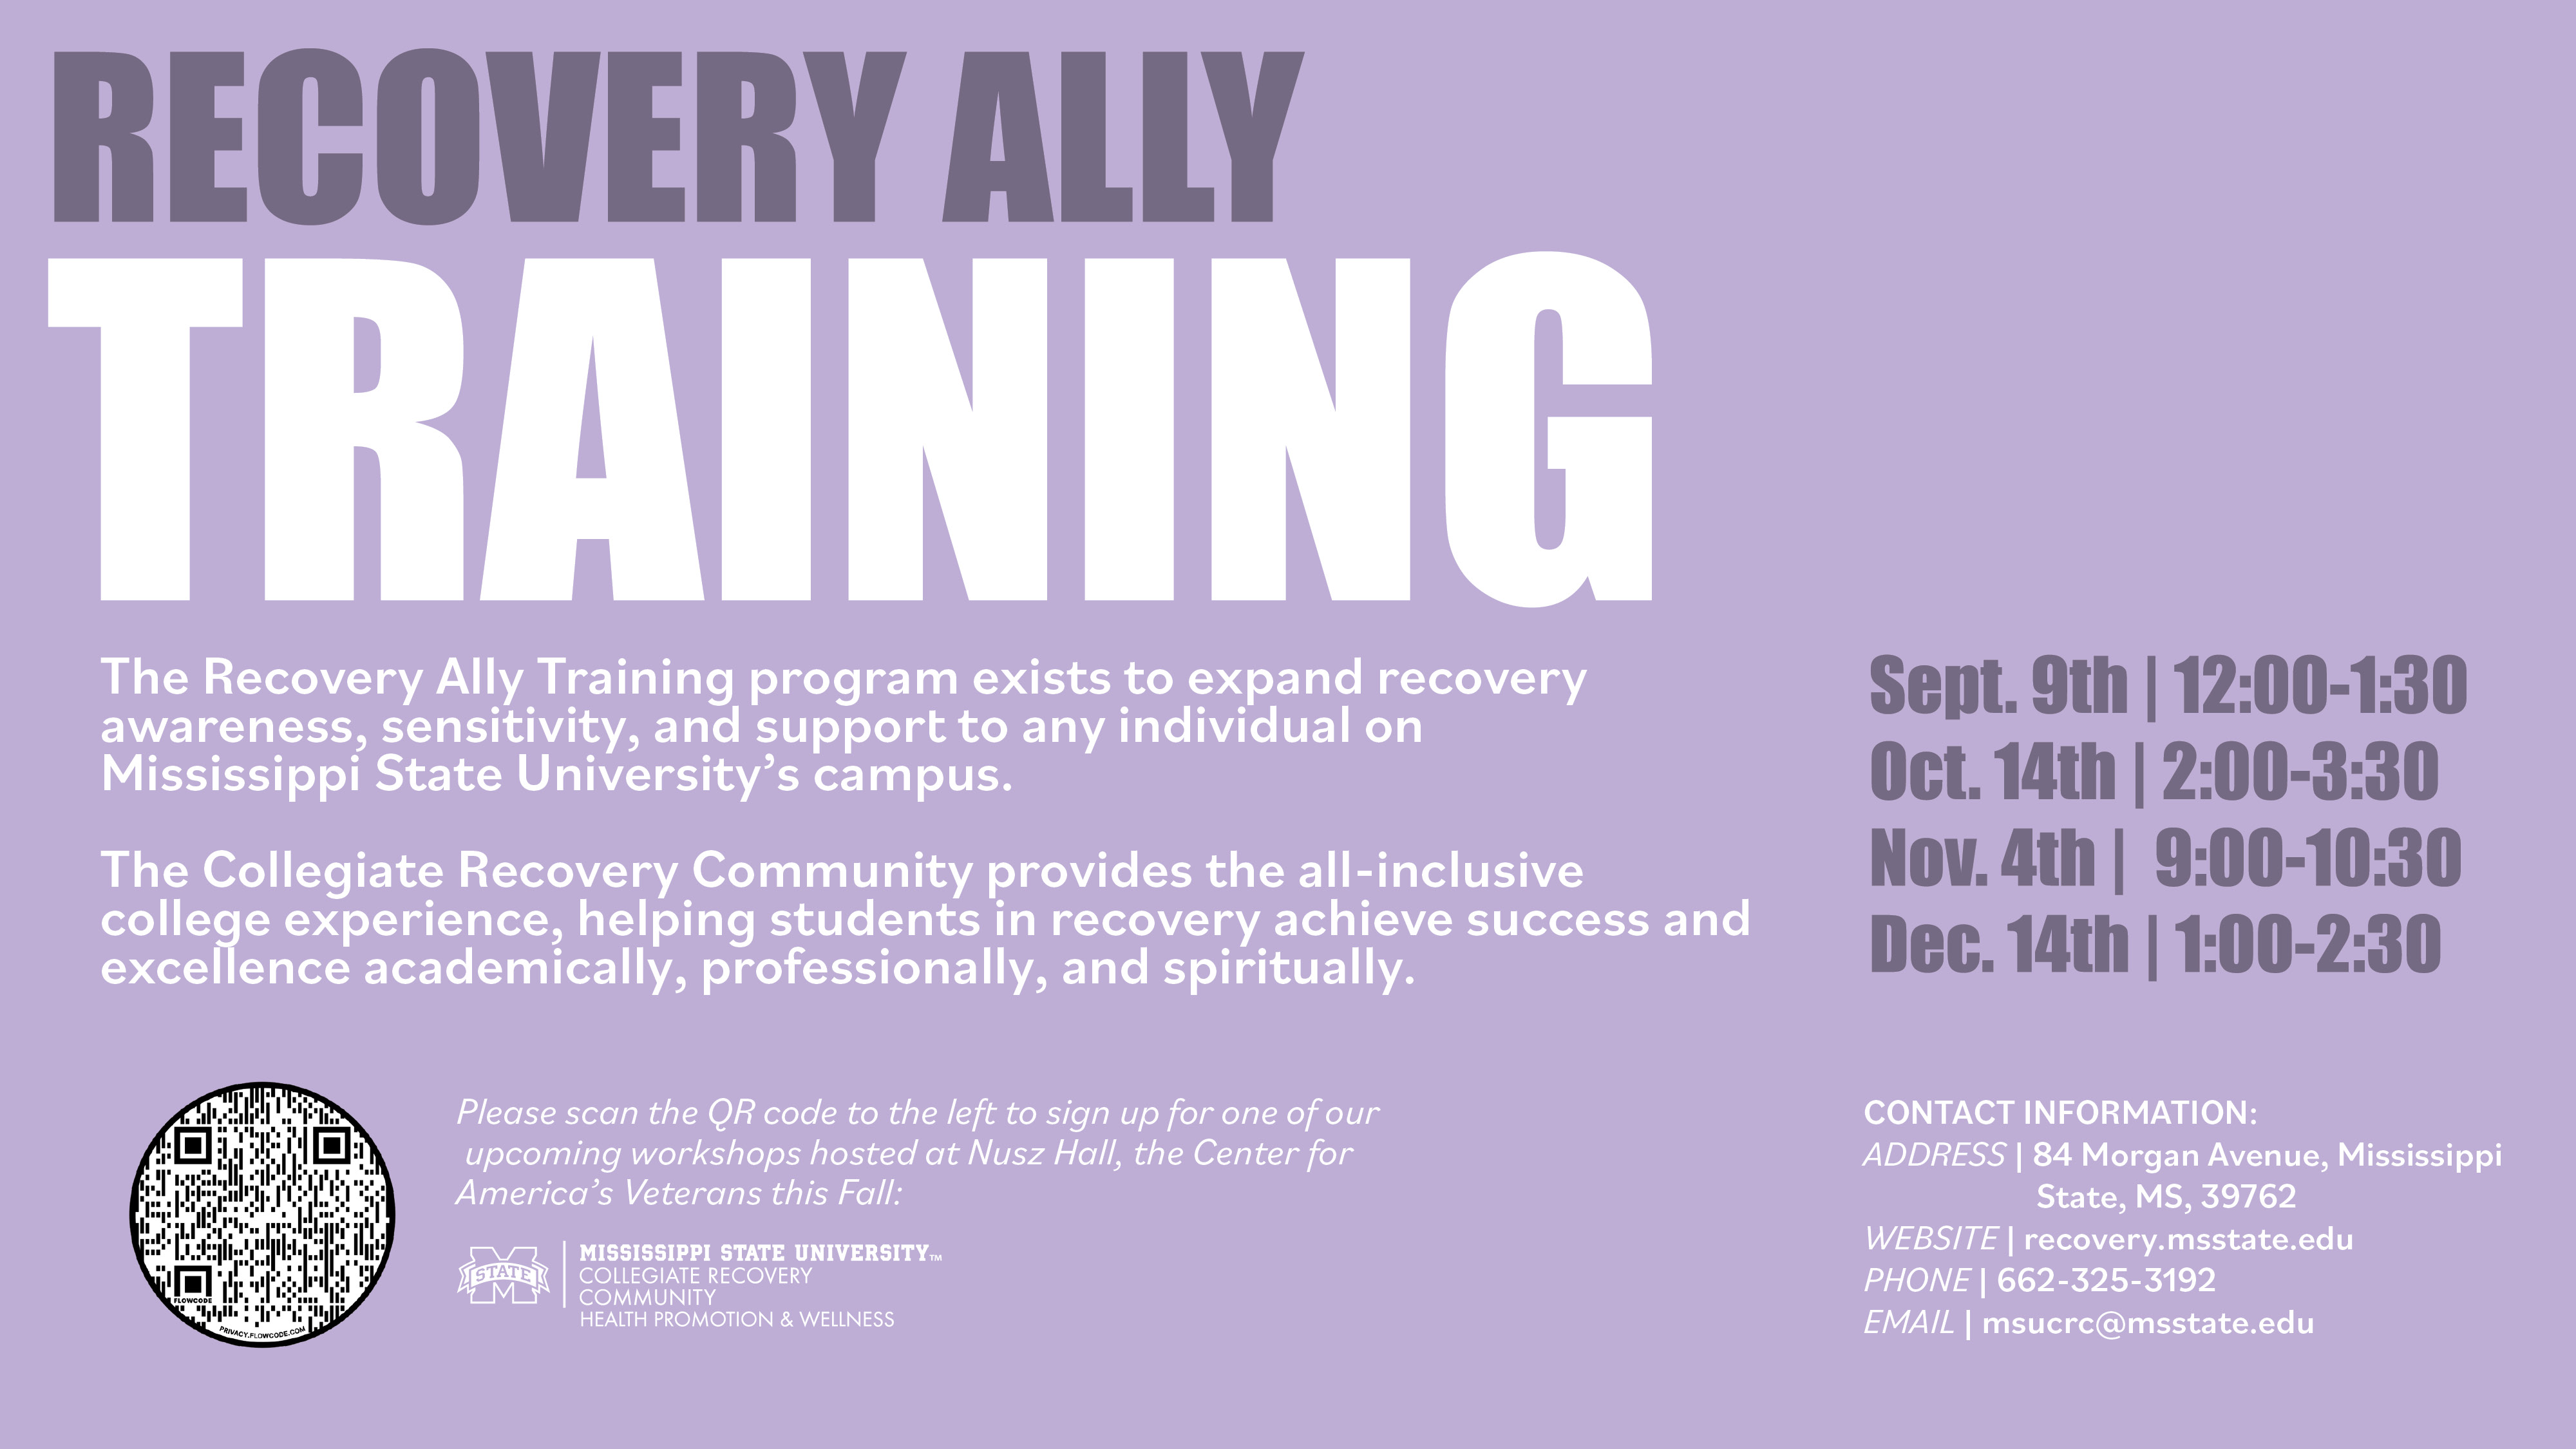 Purple graphic listing dates and other details about the MSU Collegiate Recovery Community's Recovery Ally Training sessions